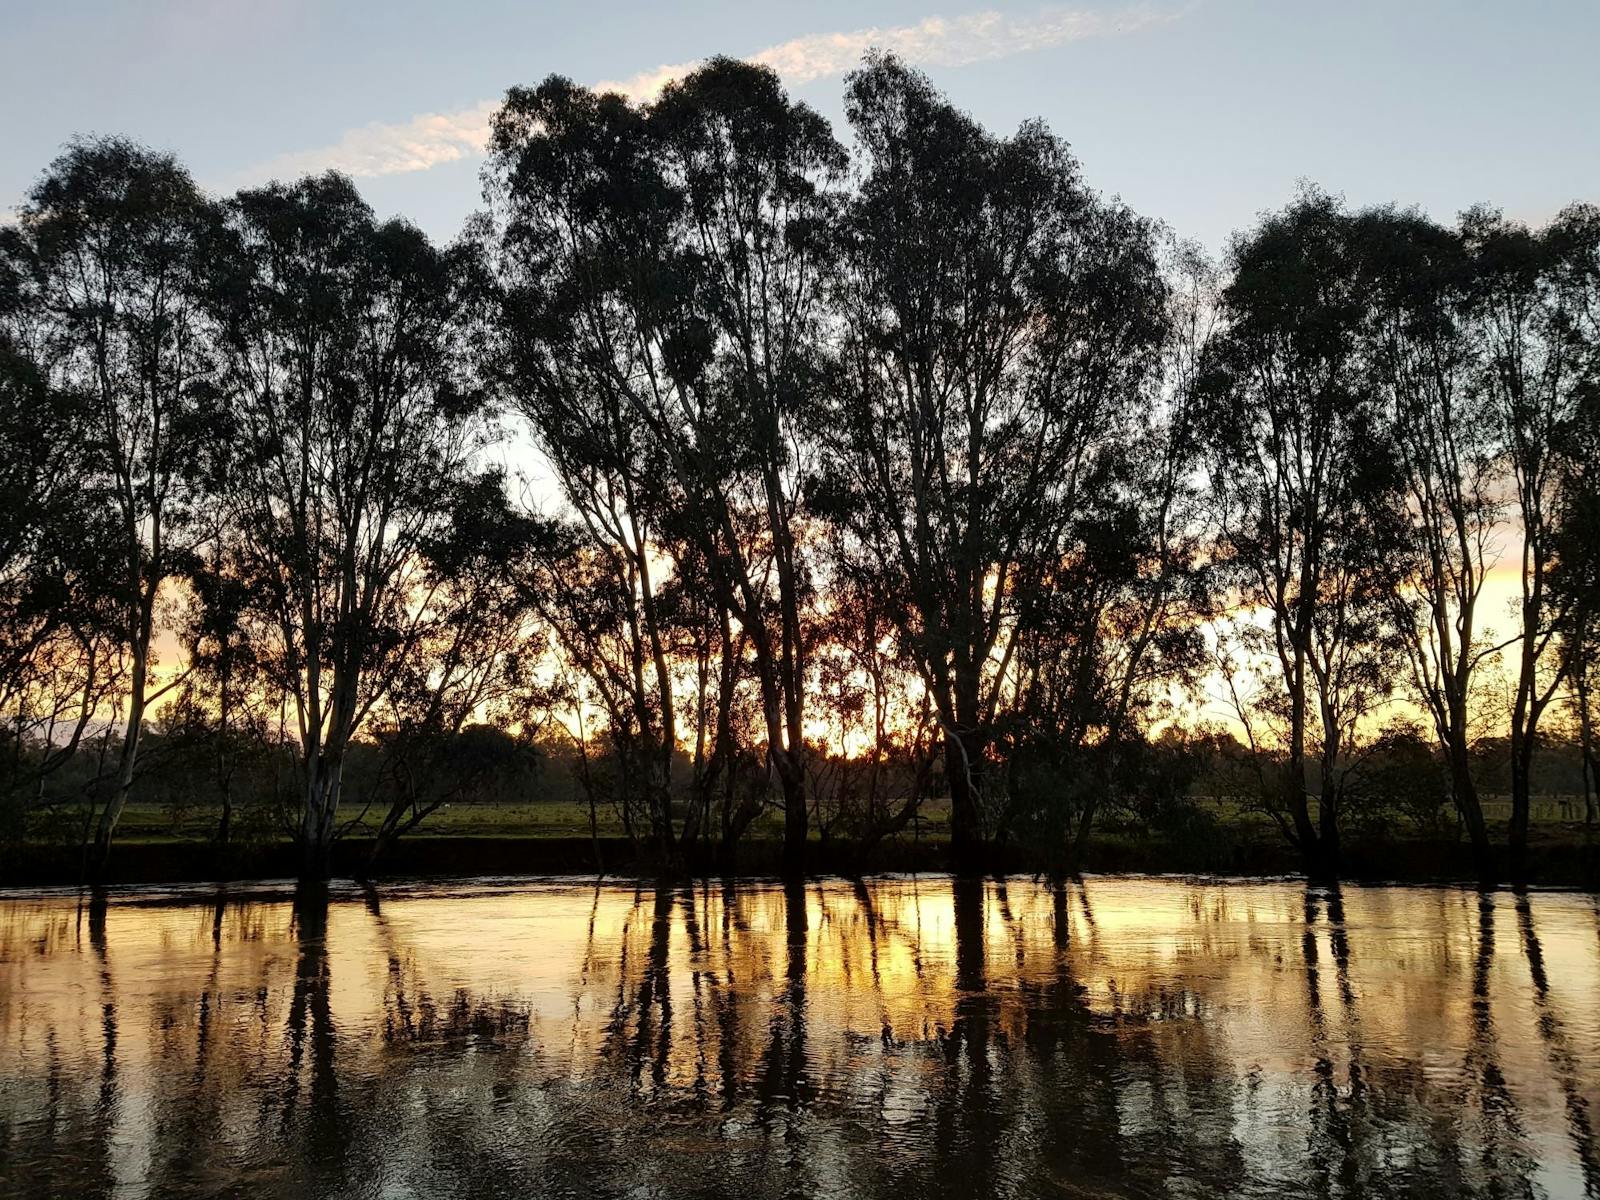 Sunset, looking over billabong with reflections of gum trees overlooking paddocks